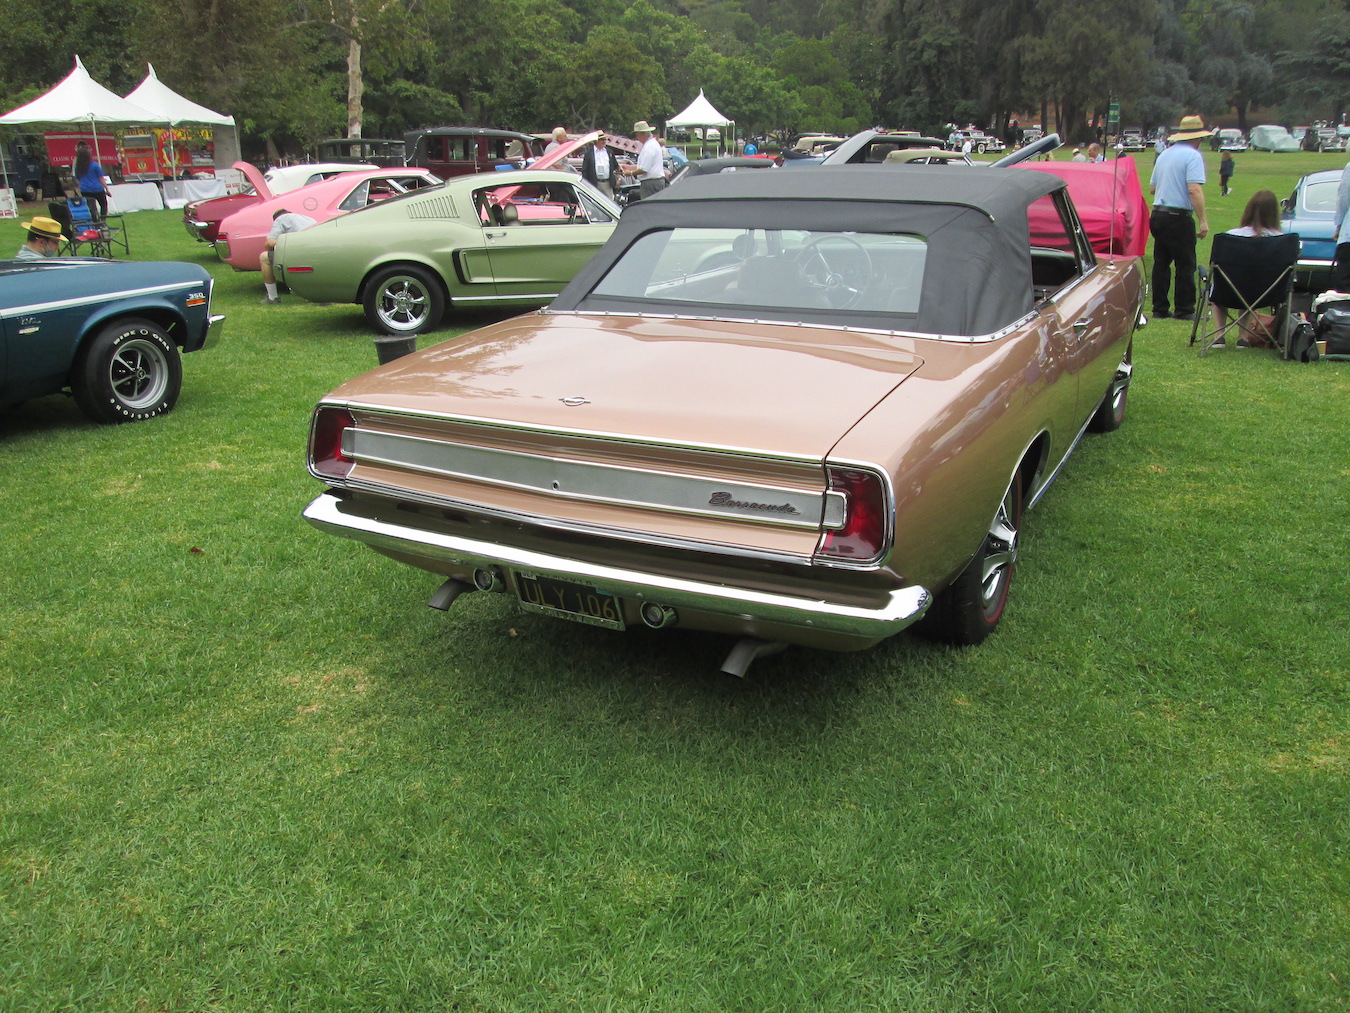 Editorial: What Do We Expect to See at a Concours?